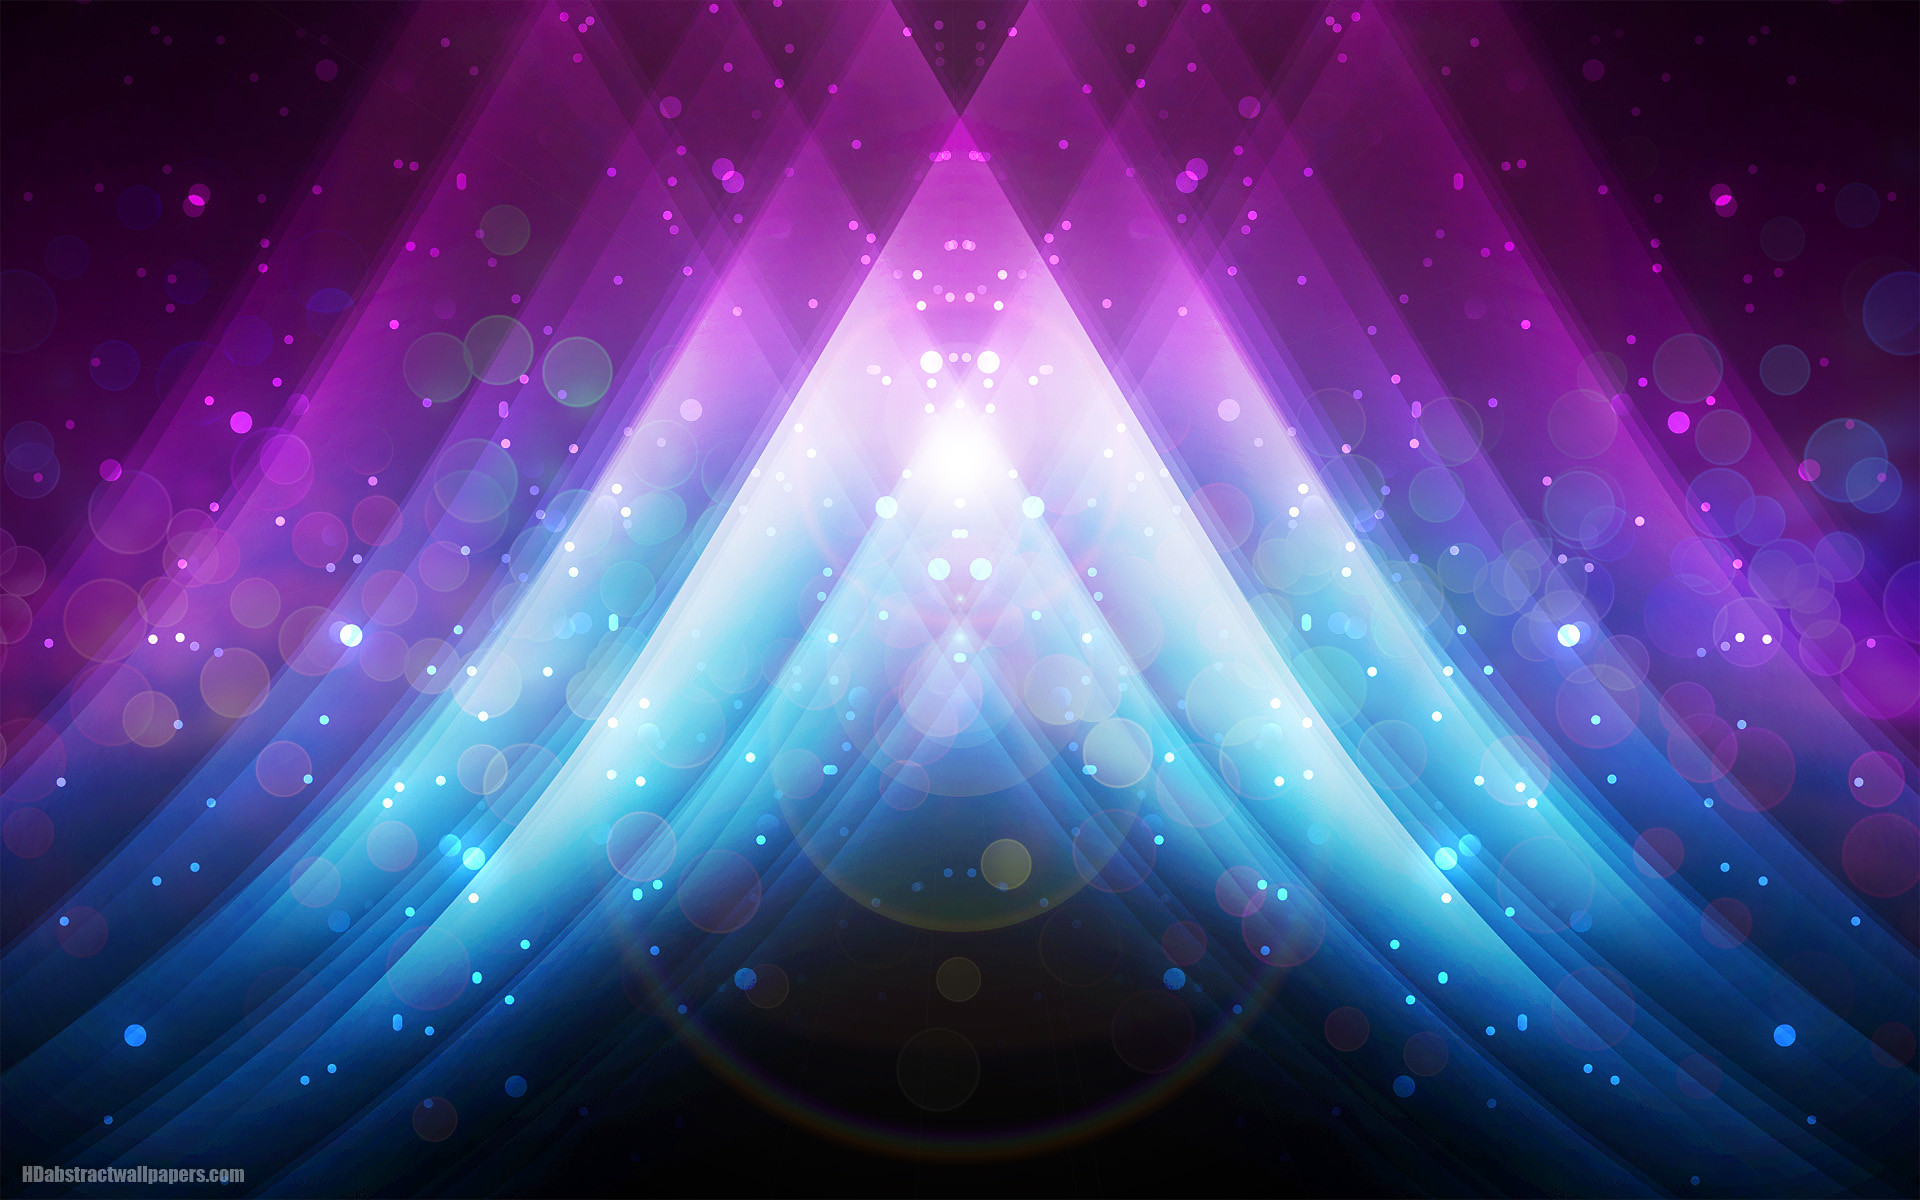 Abstract Blue Wallpaper With Beautiful Colors, Lights, - Colors Purple And  Blue - 1920x1200 Wallpaper 